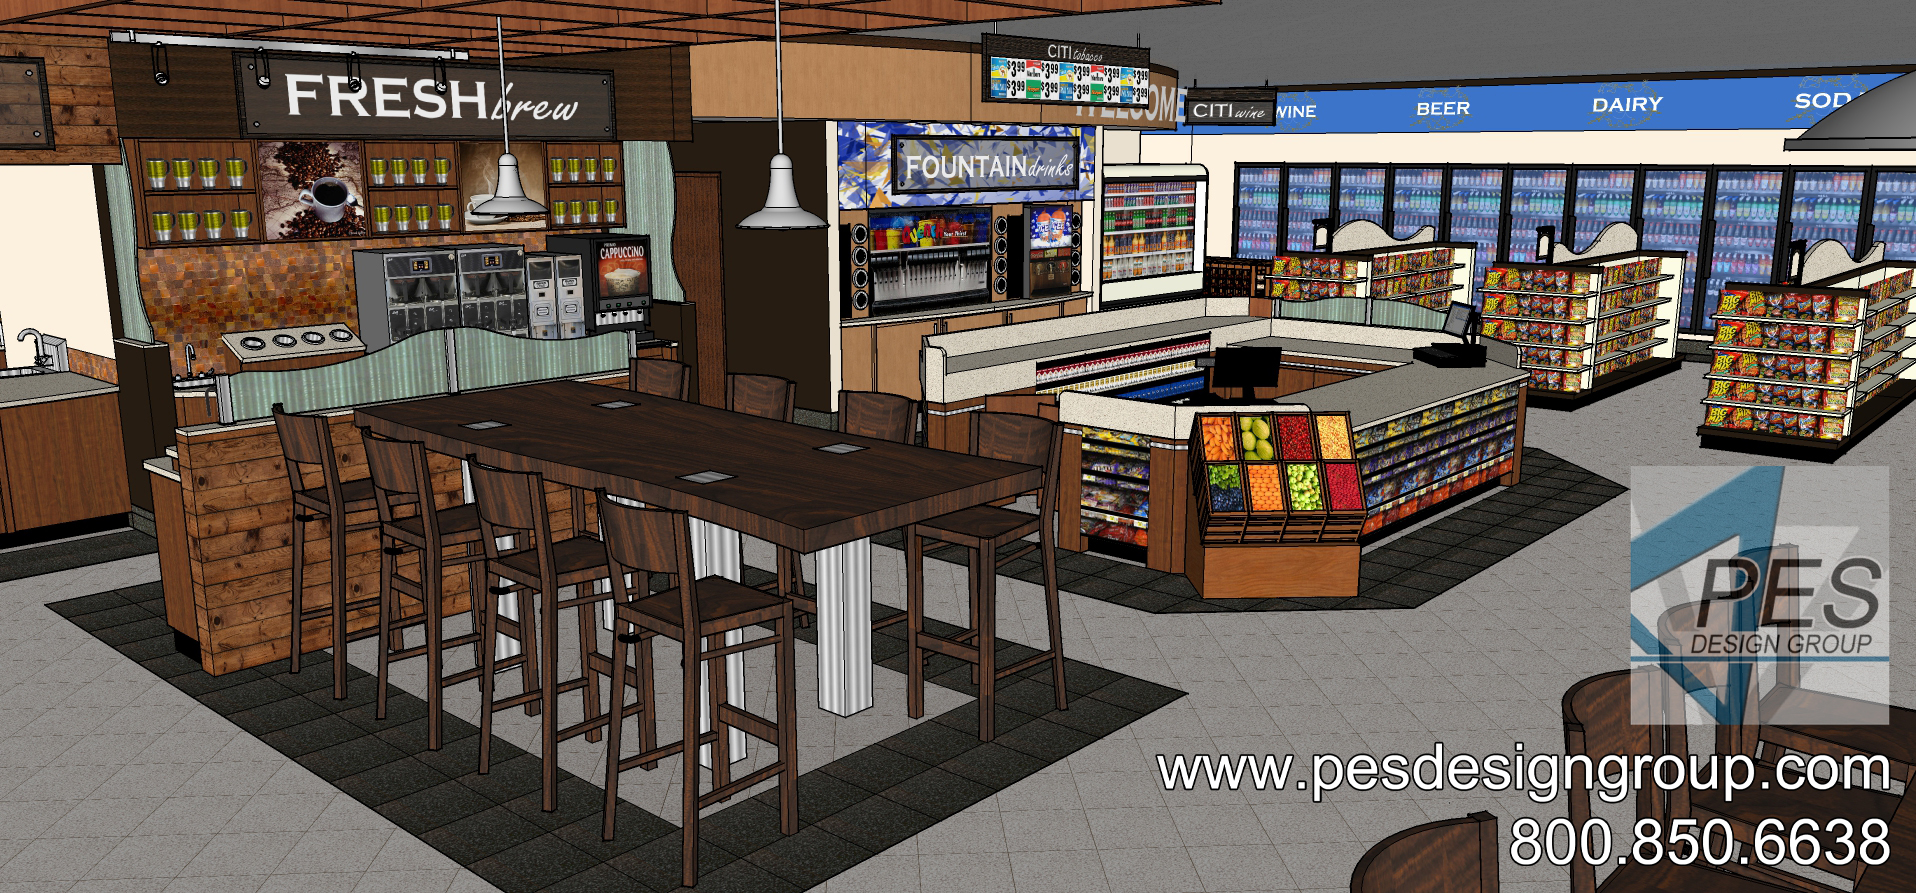 A concept rendering of the community table, cashier counter and fountain beverage area at a Shell gas station and c-store in Coconut Creek, Florida.